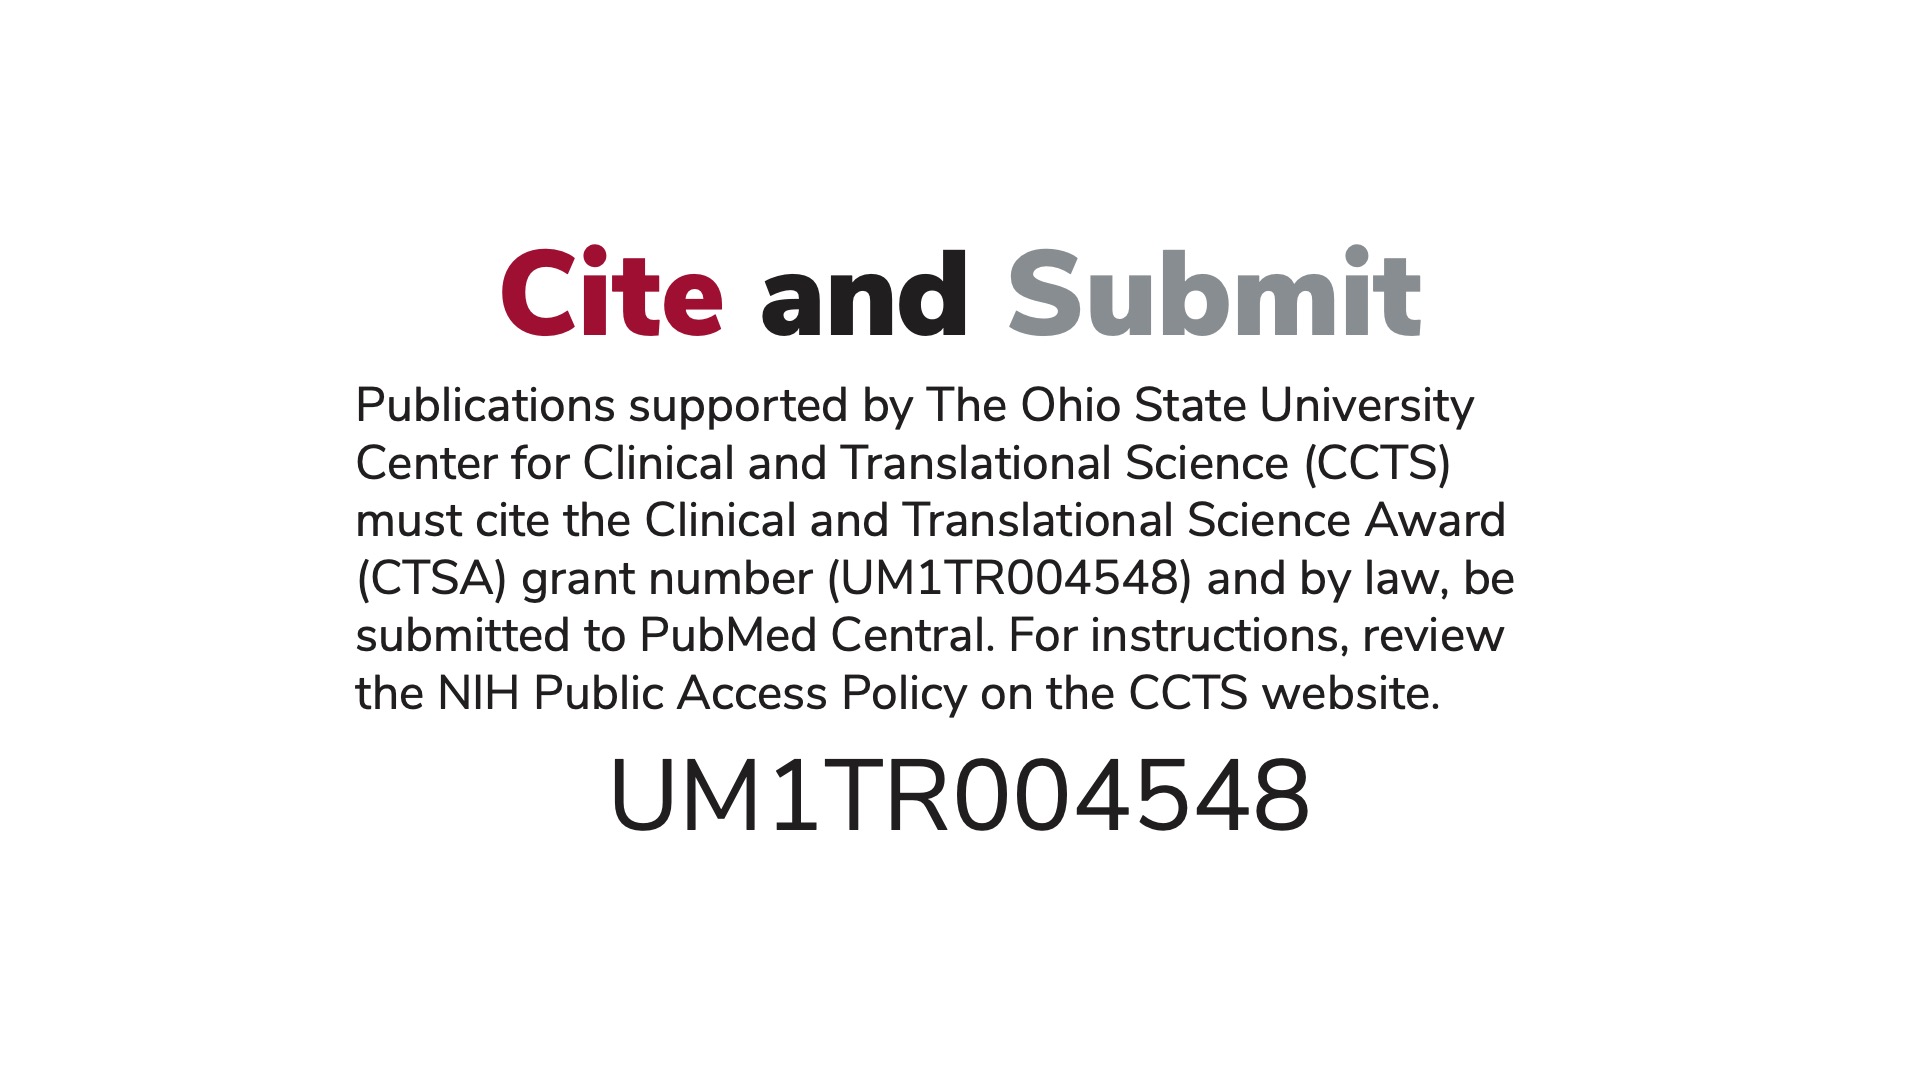 Directions to cite and submit. Publications supported by The Ohio State University Center for Clinical and Translational Science (CCTS) must cite the Clinical and Translational Science Award (CTSA) grant number (UM1TR004548) and by law, be submitted to PubMed Central. For instructions, review the NIH Public Access Policy on the CCTS website.